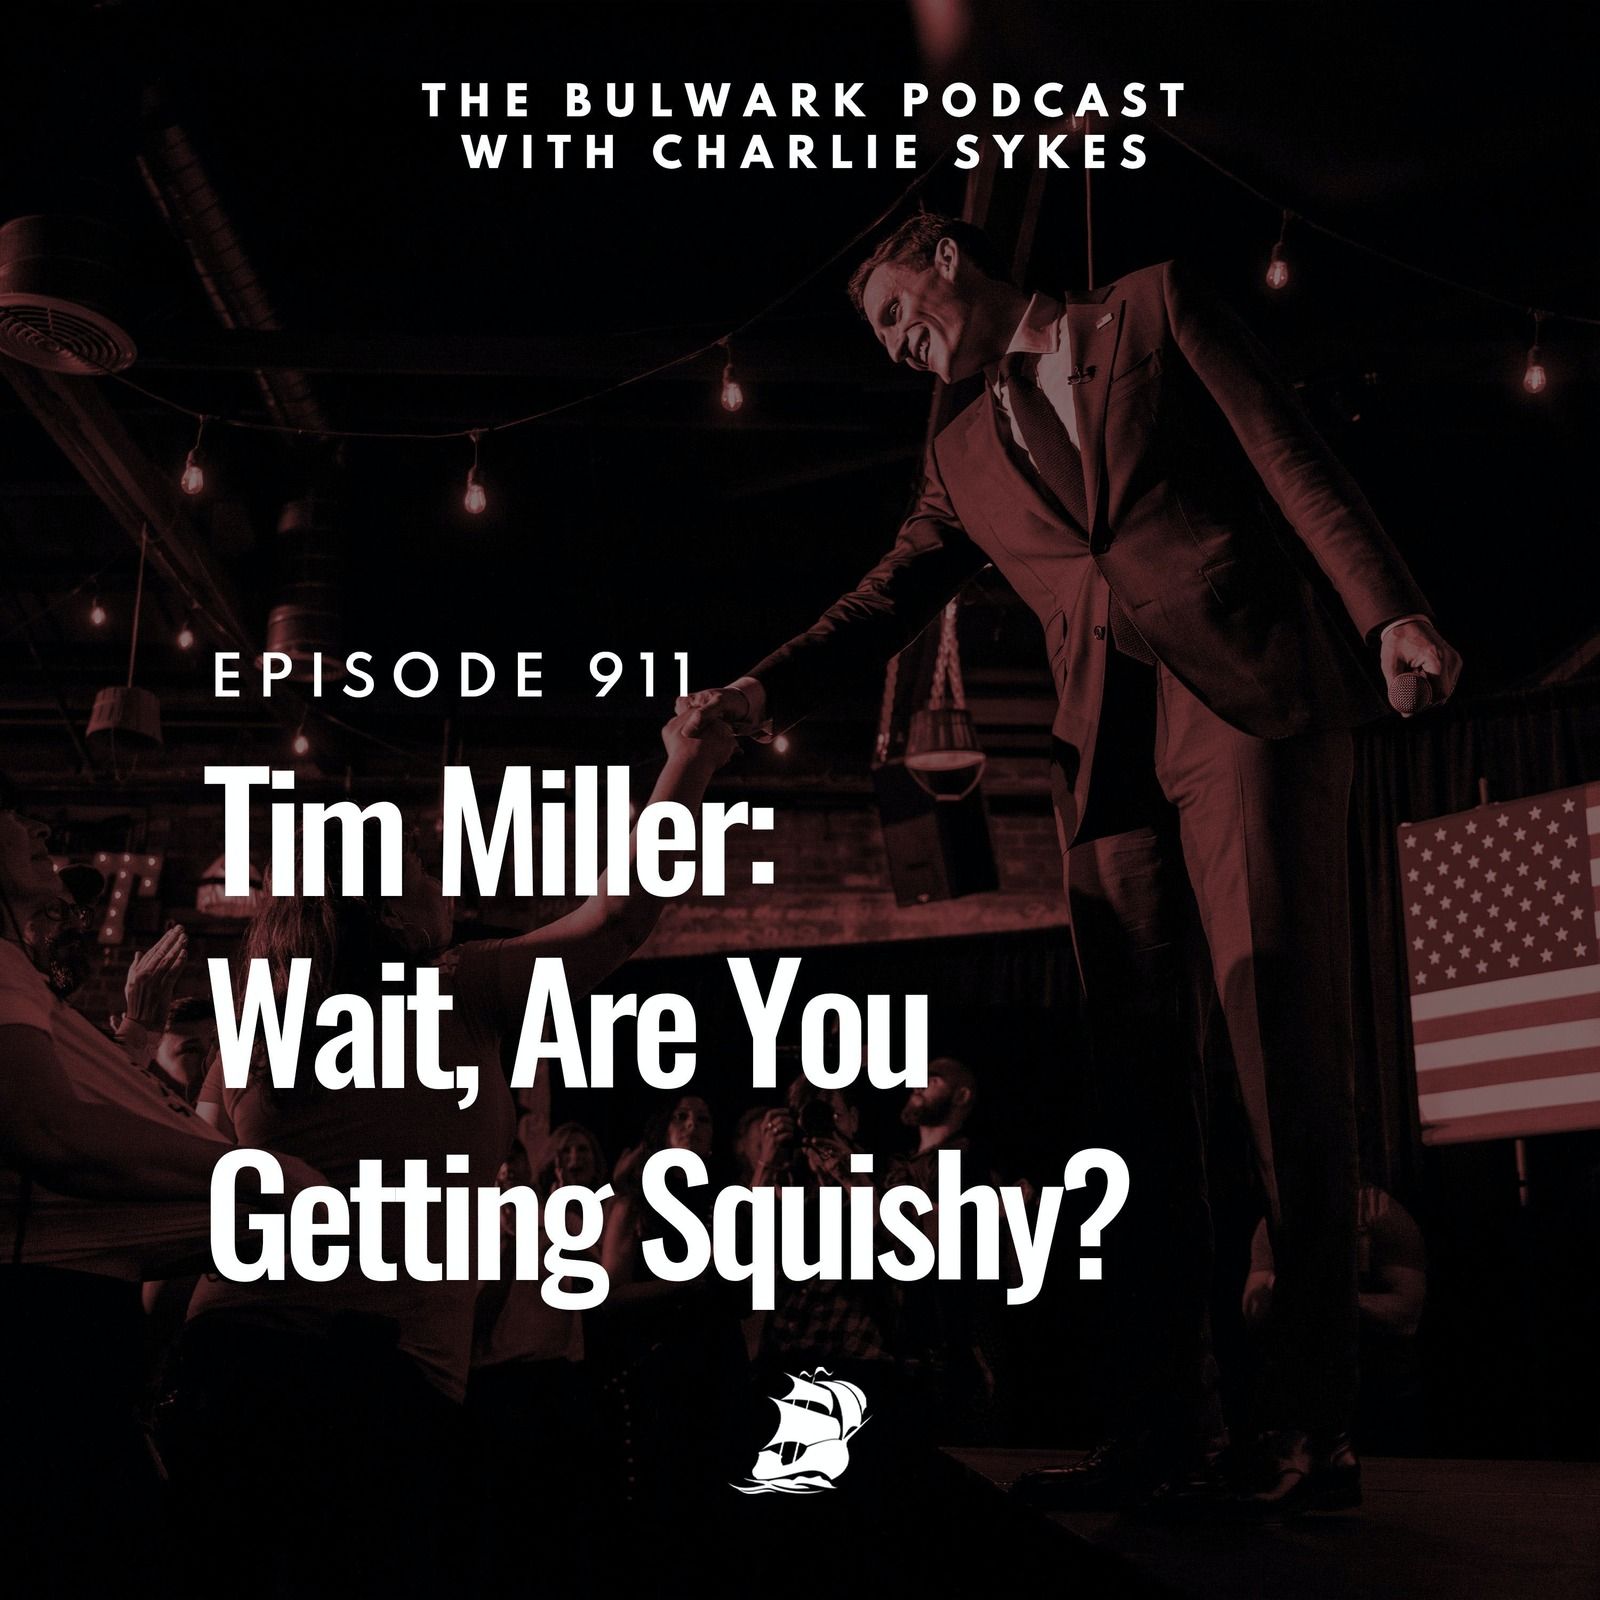 Tim Miller: Wait, Are You Getting Squishy? by The Bulwark Podcast